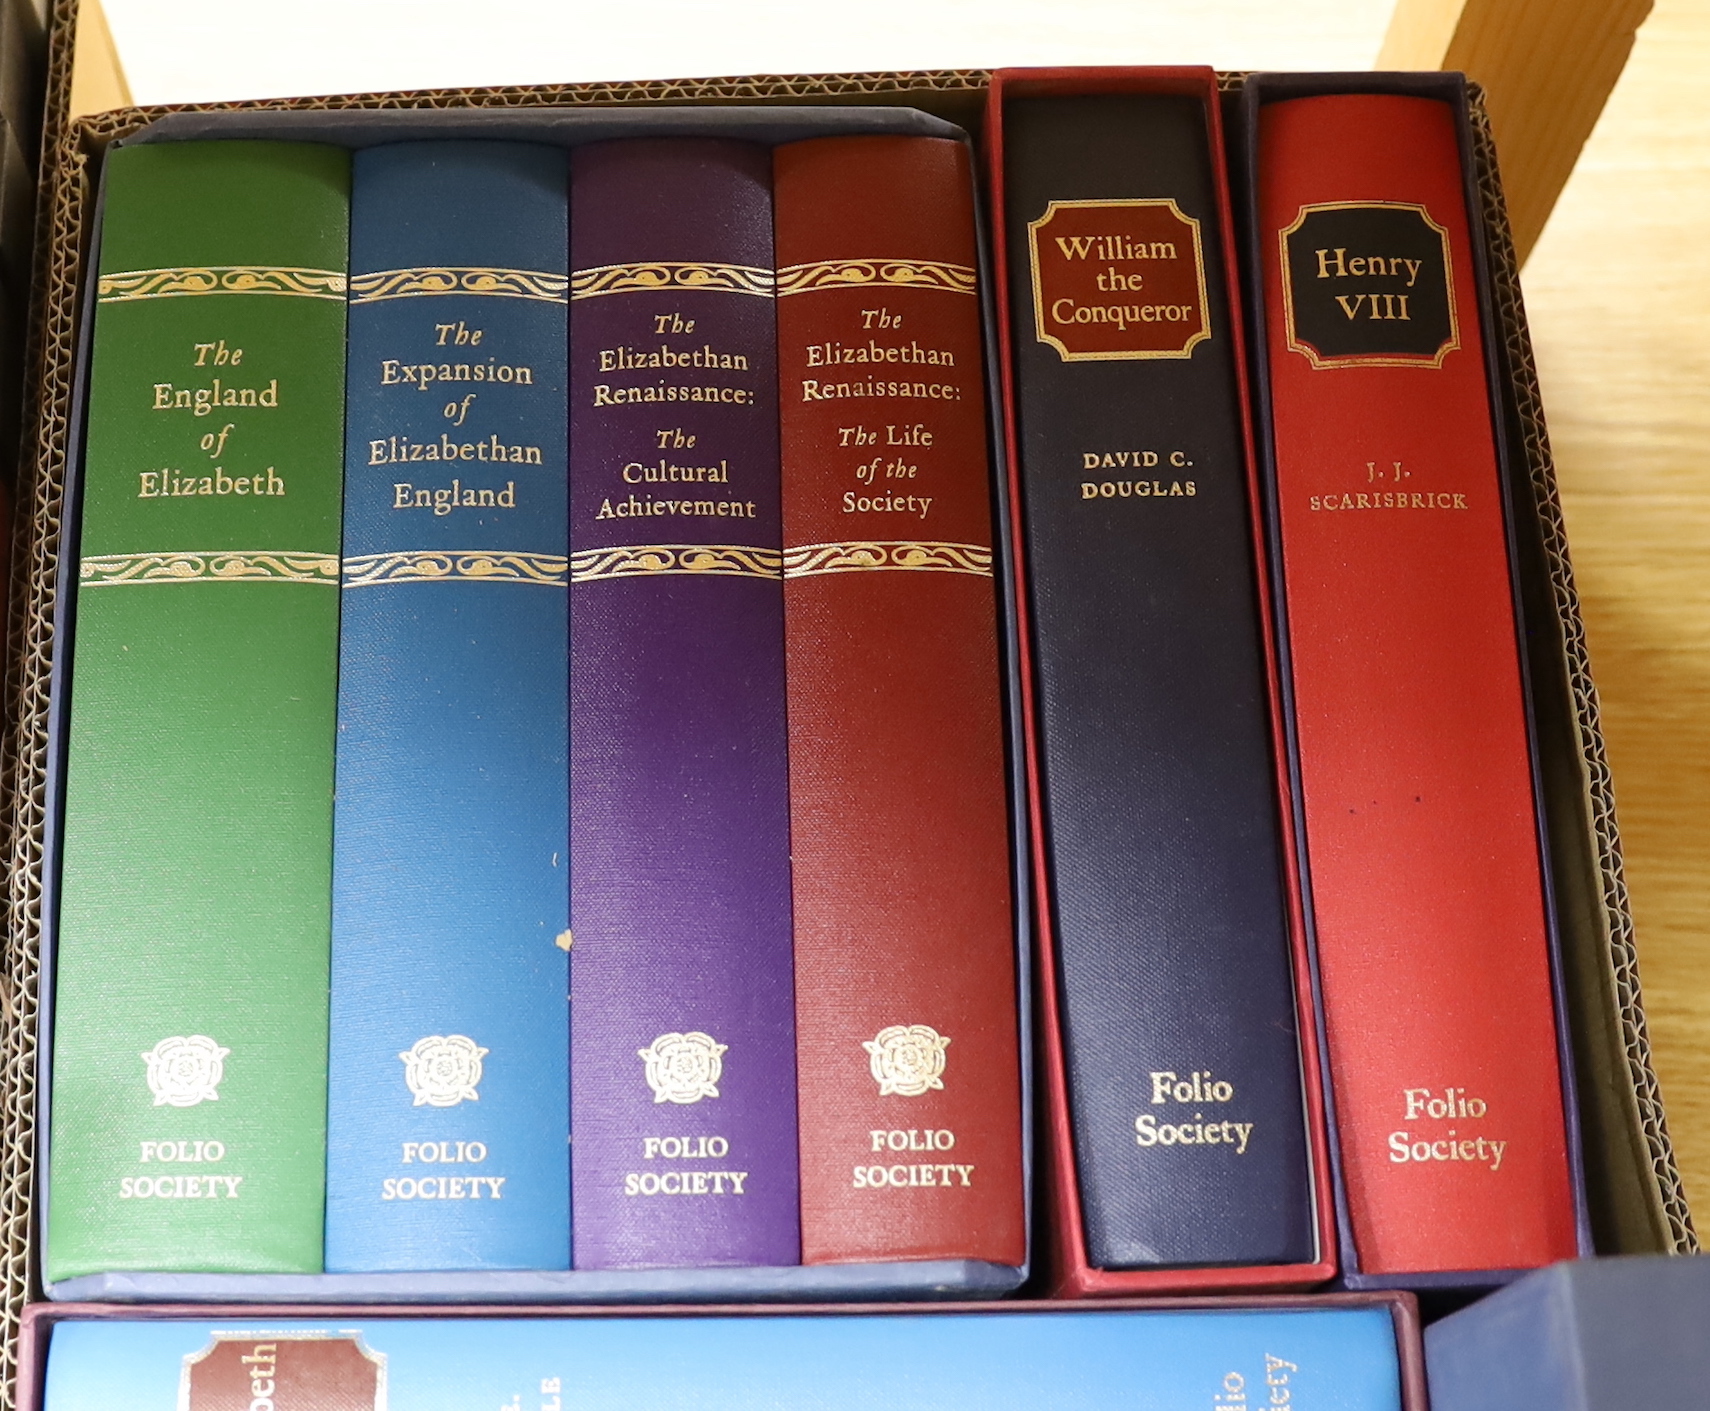 Folio Society - A miscellany of British History, includes The Cambridge Cultural History of Britain - 9 vols (boxed), many illus., gilt cloth, 1995; Rowse's England of Elizabeth. 4 vols. (boxed). num. illus., gilt cloth,